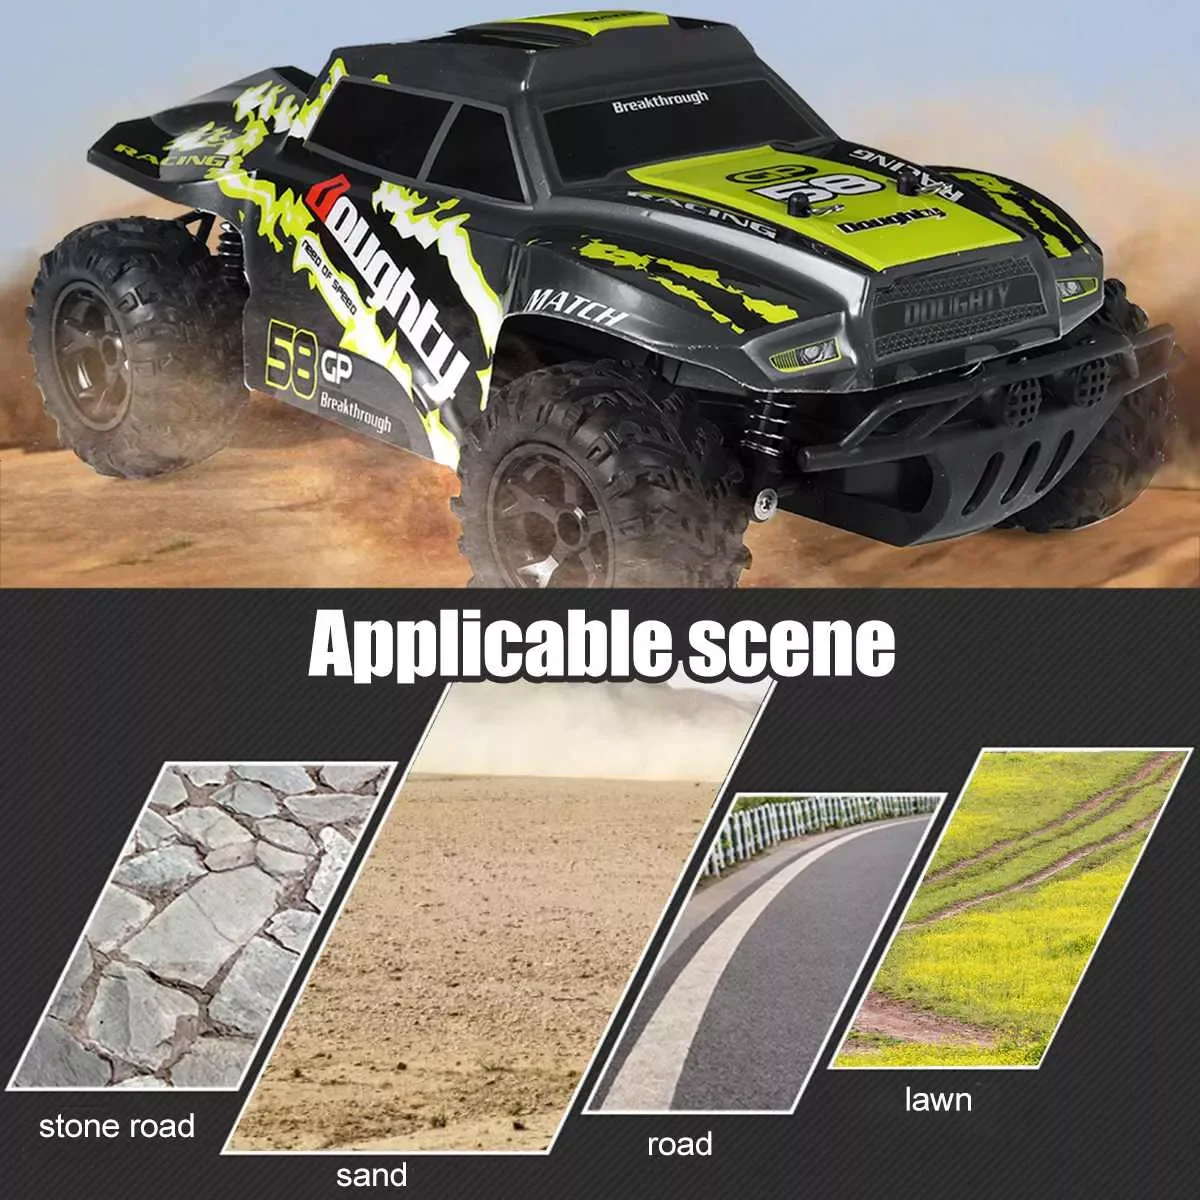 Remote Control Car,2.4GHz All-Terrain 15Km/h Off-Road RC Monster Truck Toy with Battery for Boys Kid Christmas Gift enlarge